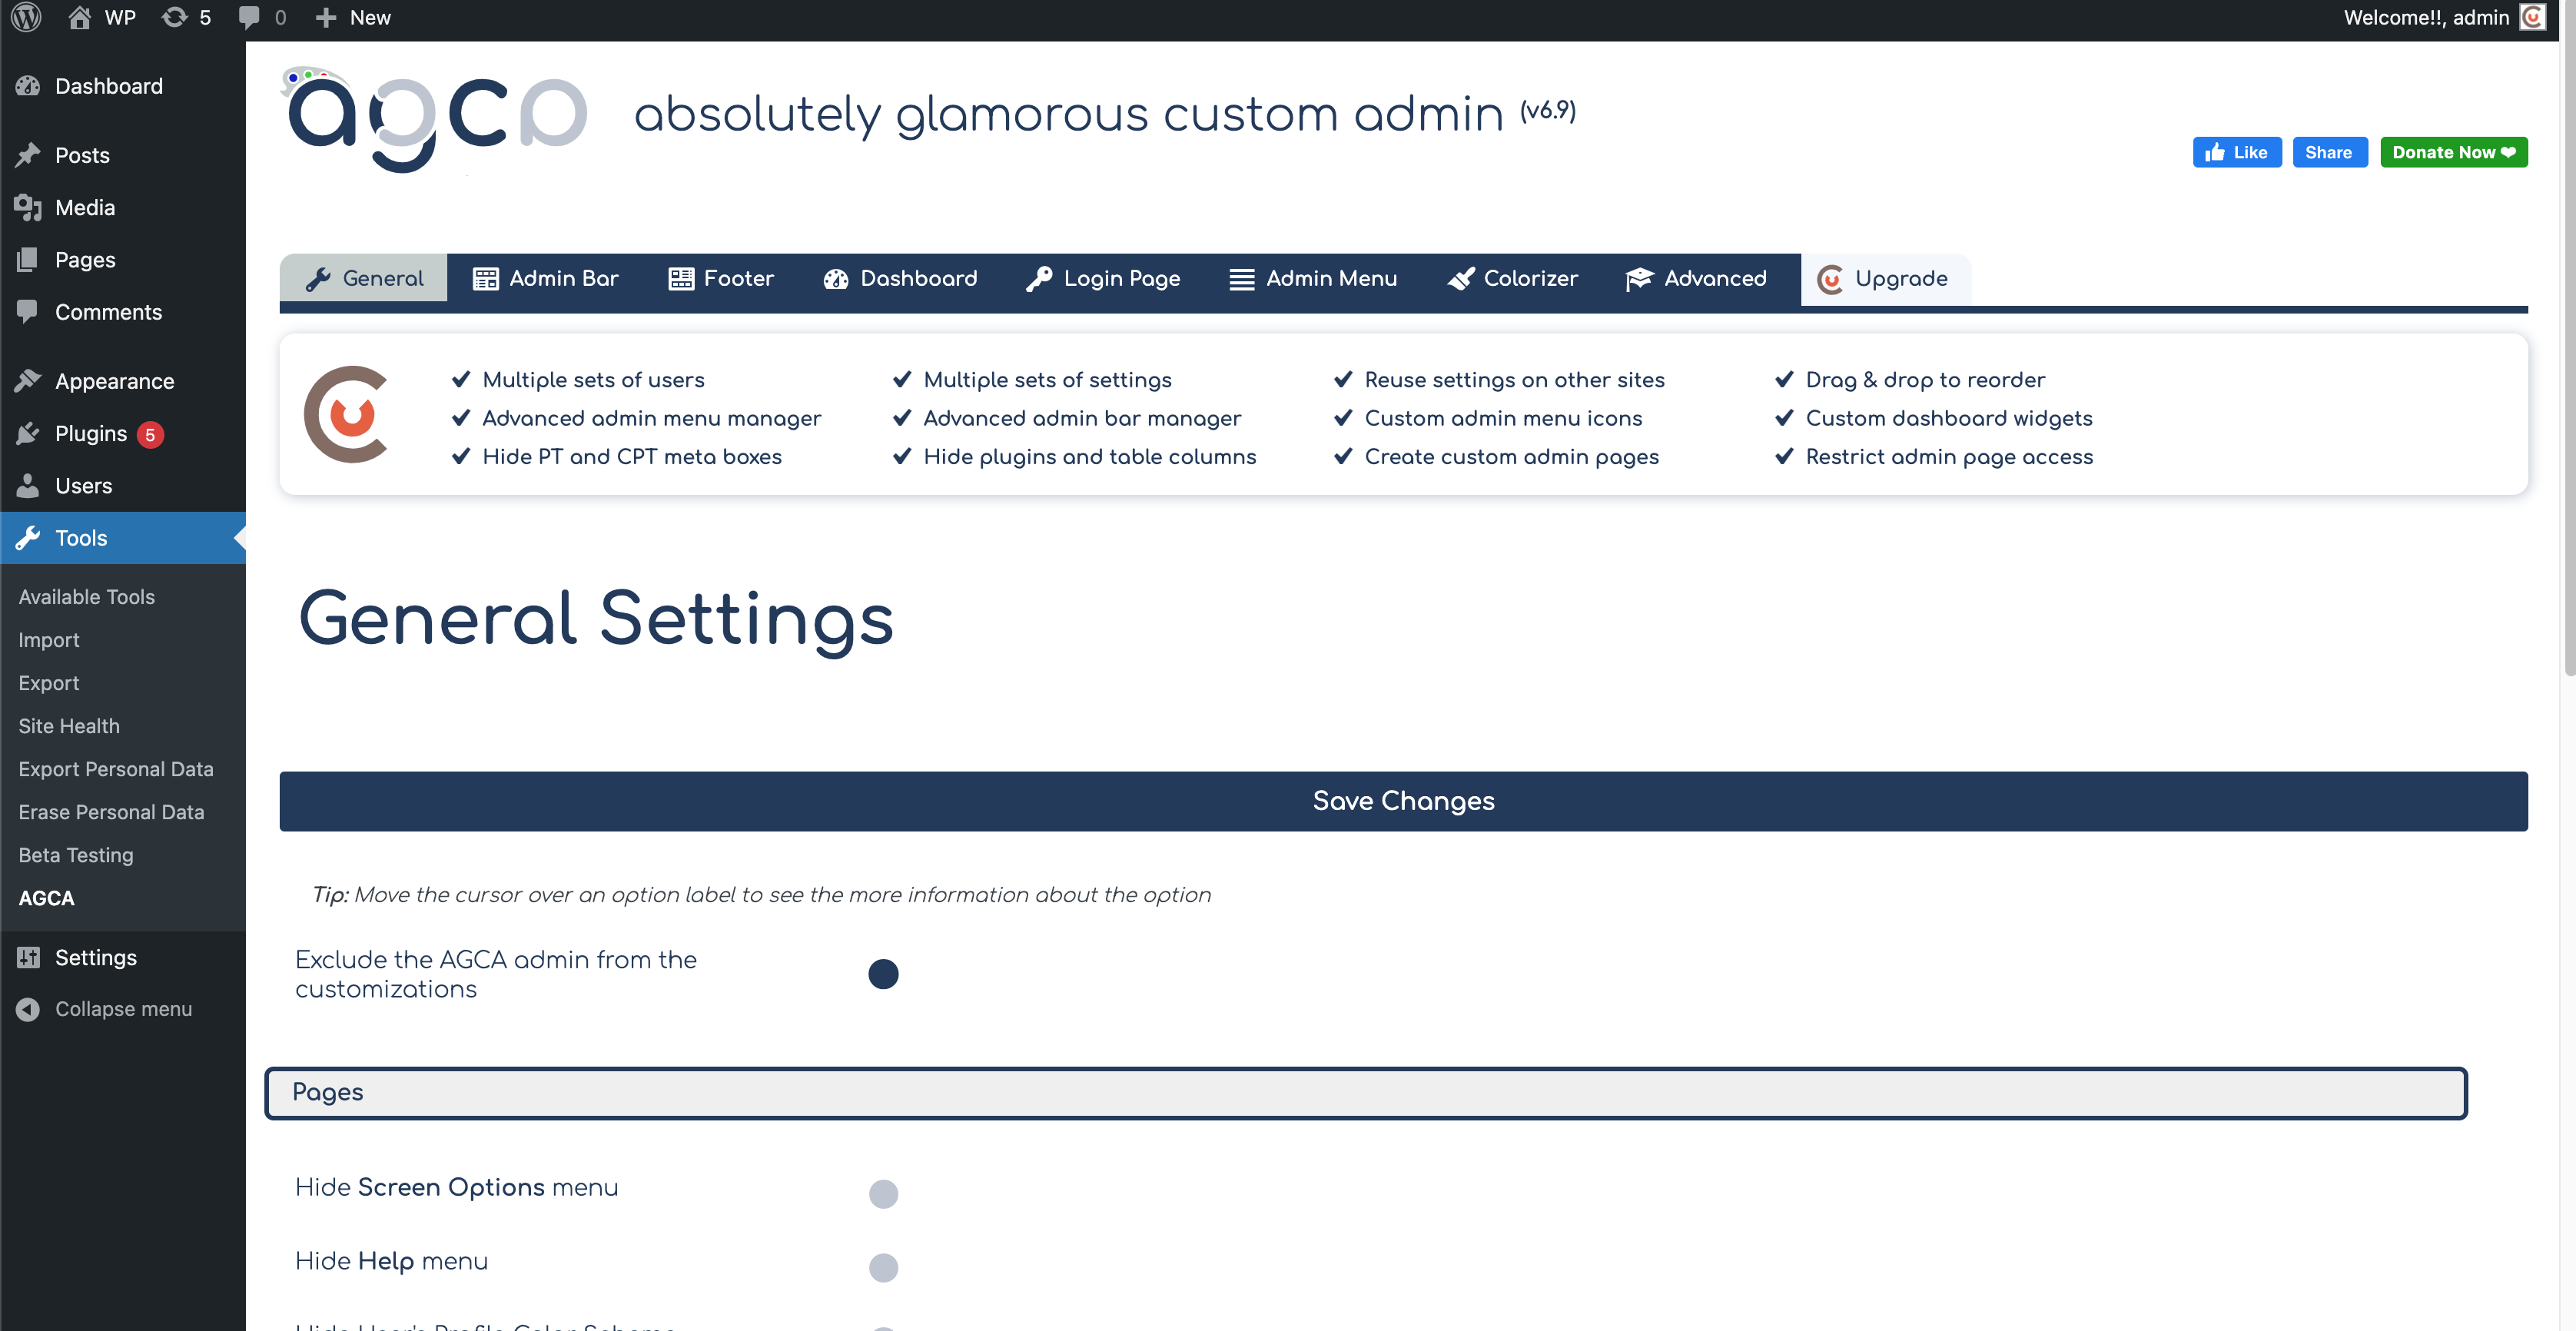 Absolutely Glamorous Custom Admin provides many options for admin panel customization, and it's quite easy to use